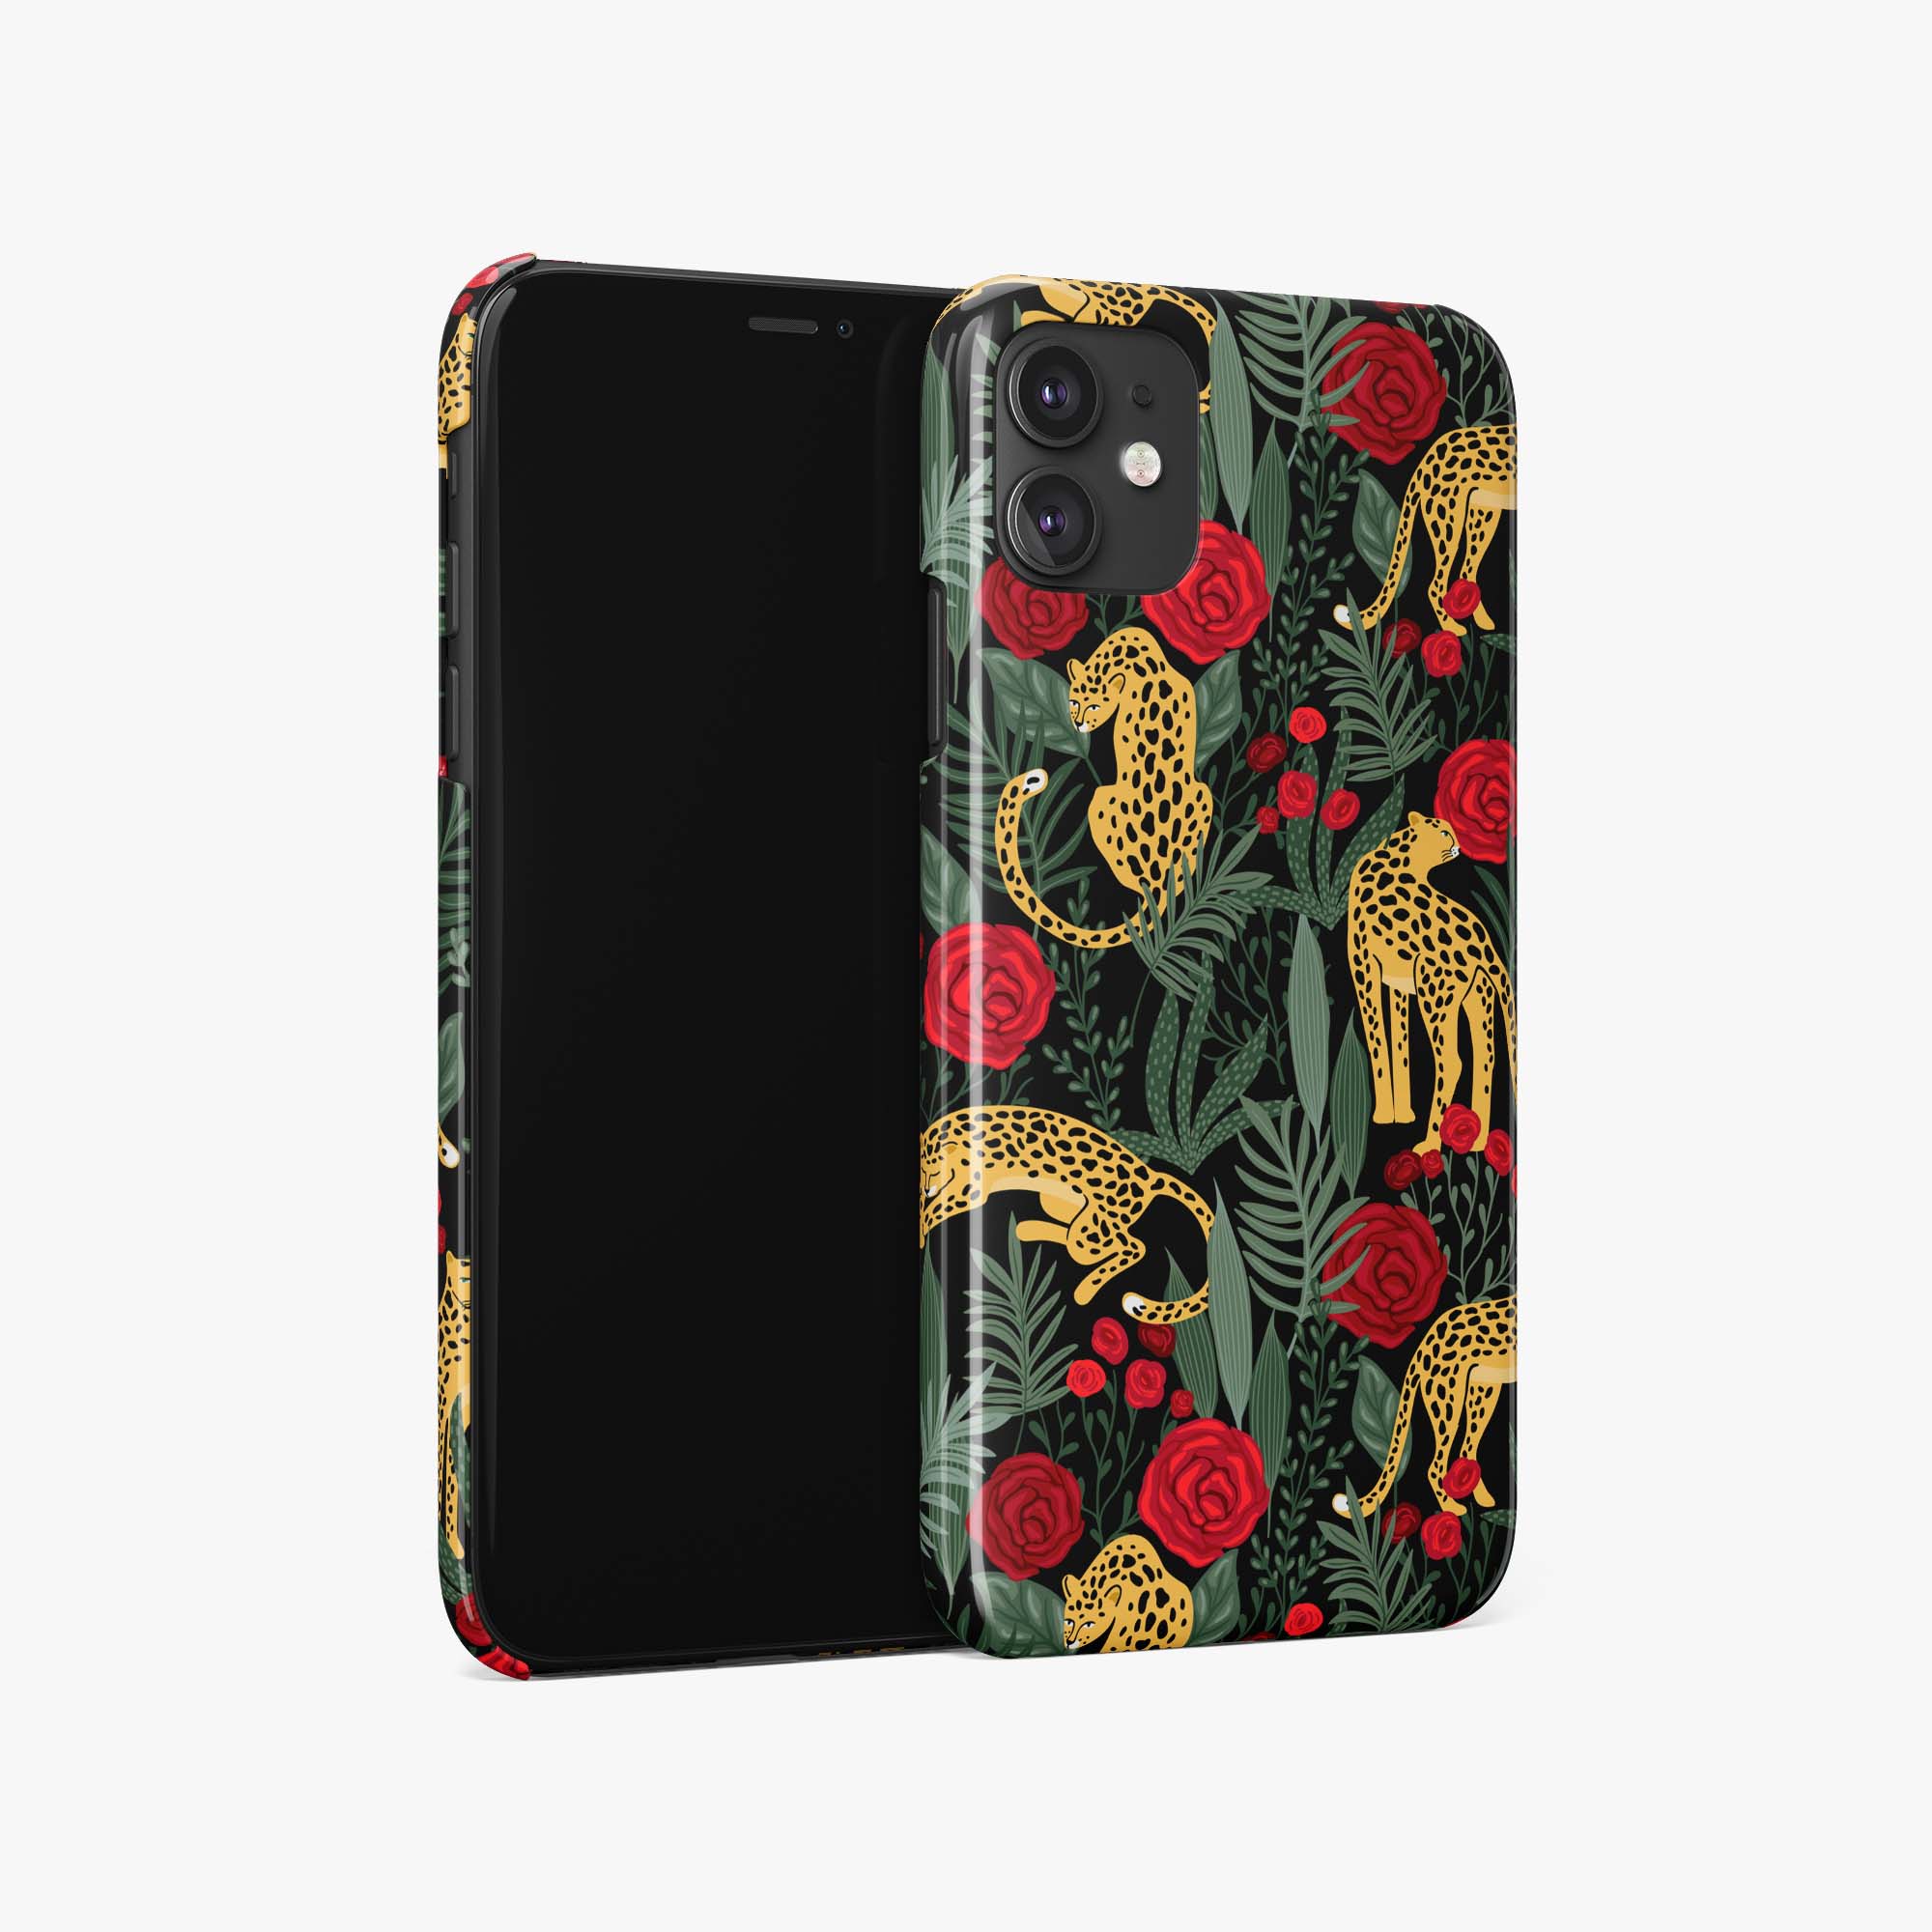 The Tropical Leopard Phone Case